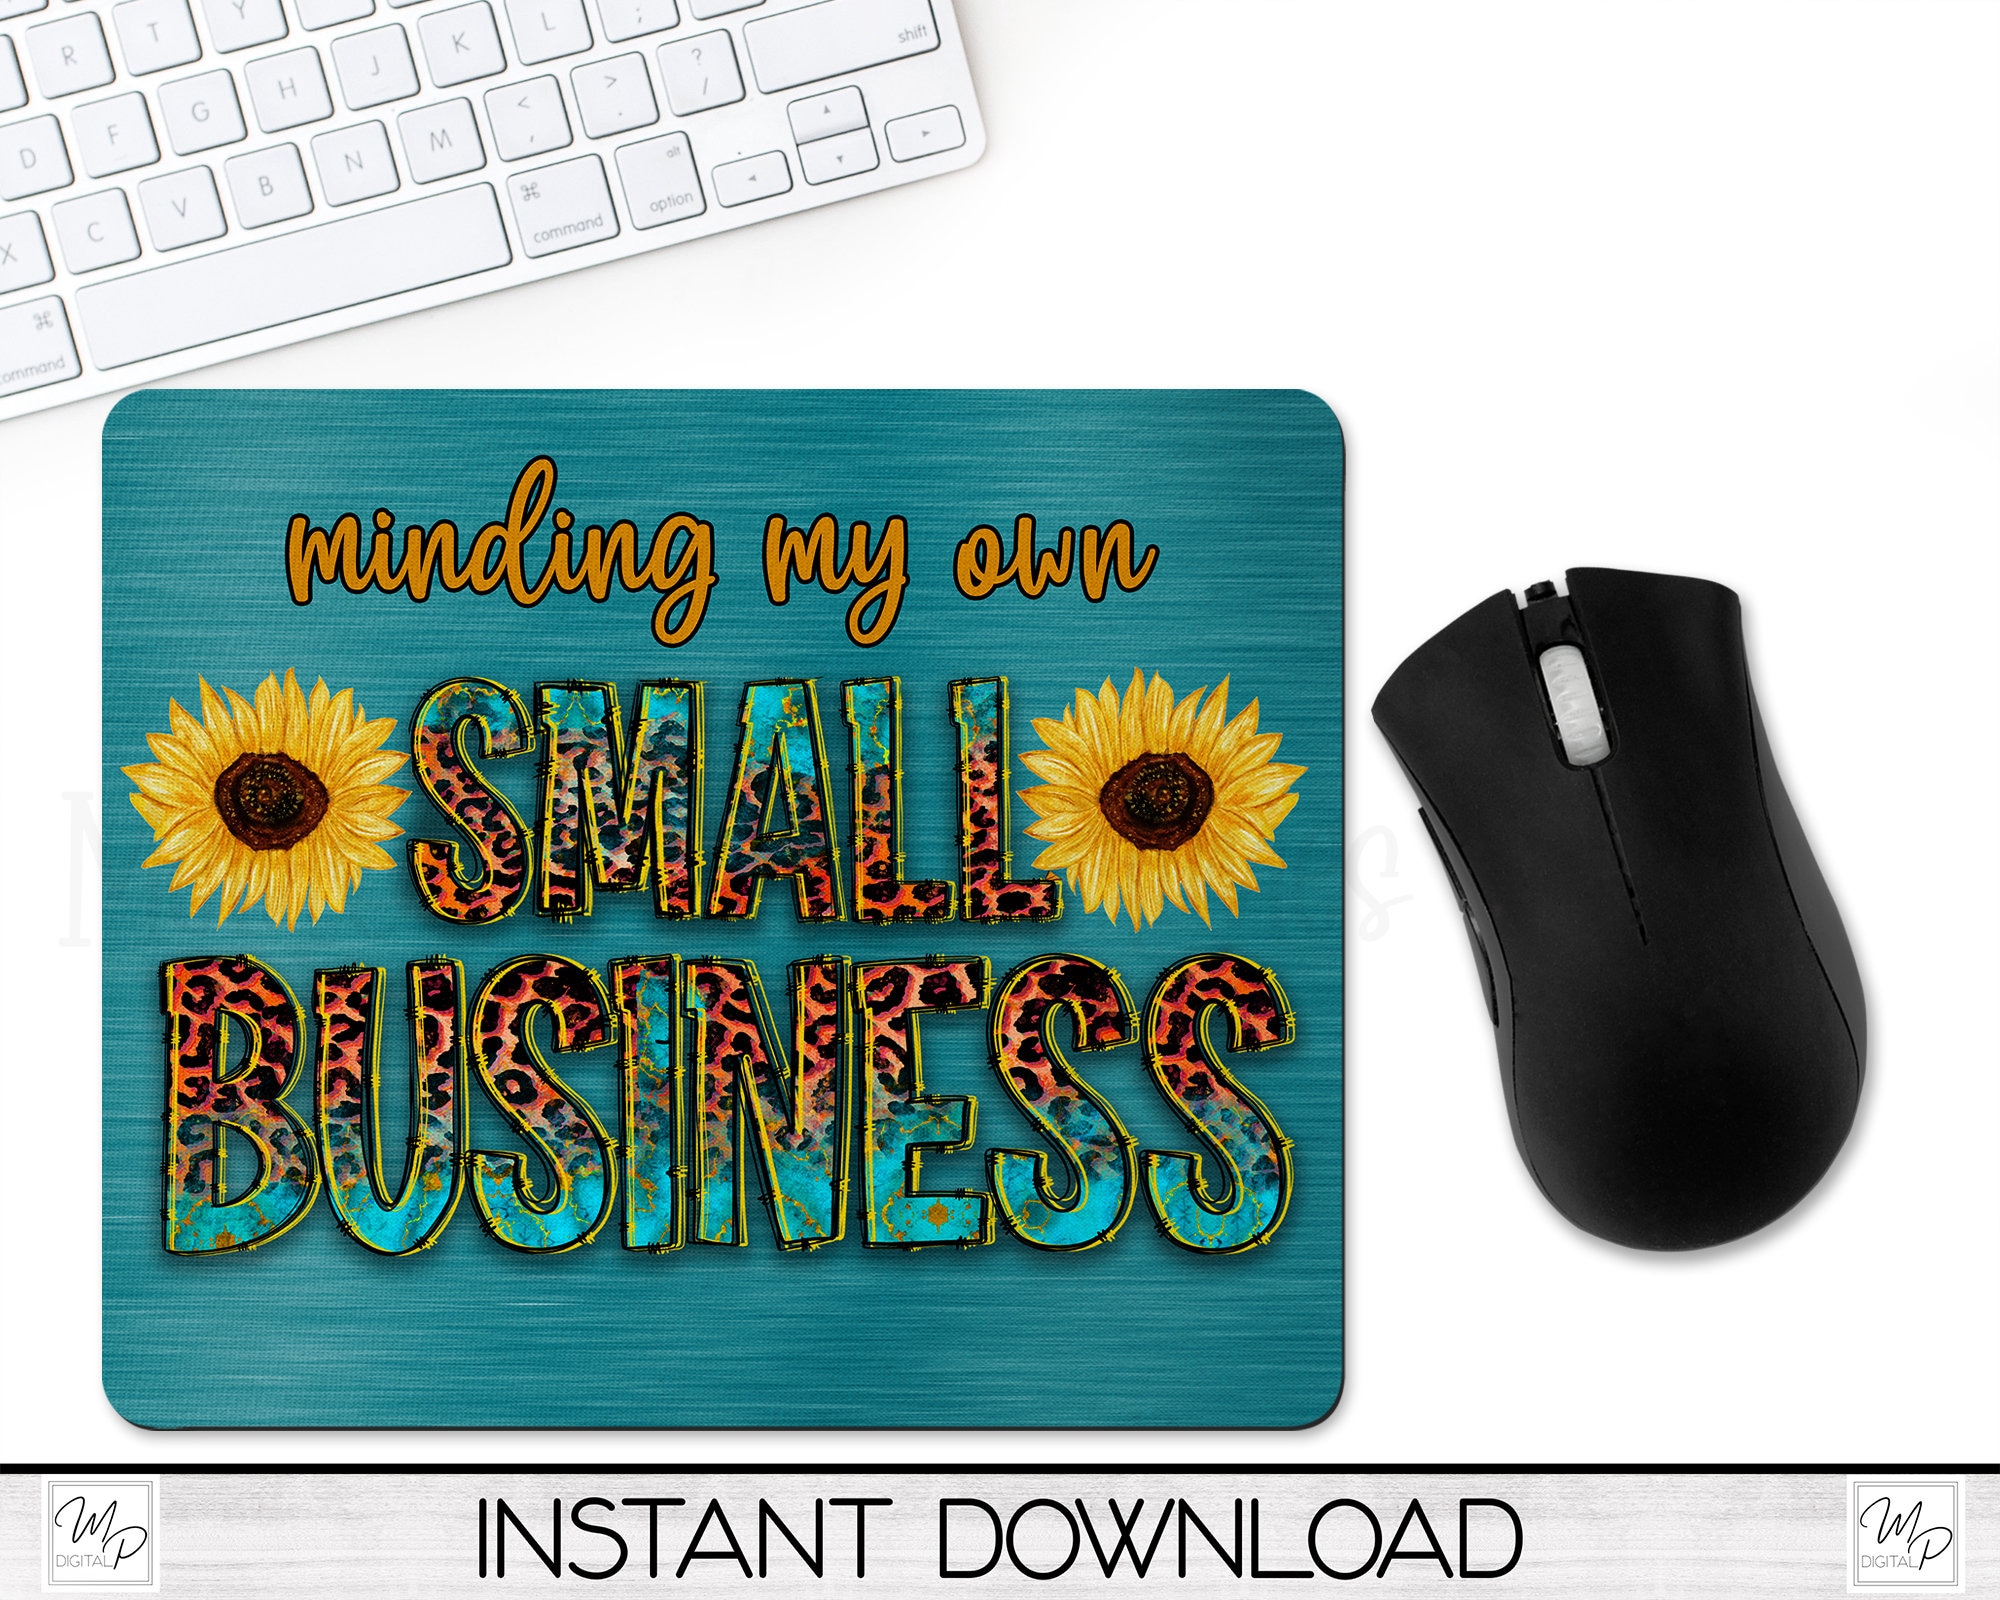 Sublimation Mouse Pad MP-01, Corporate Promotional Gifts